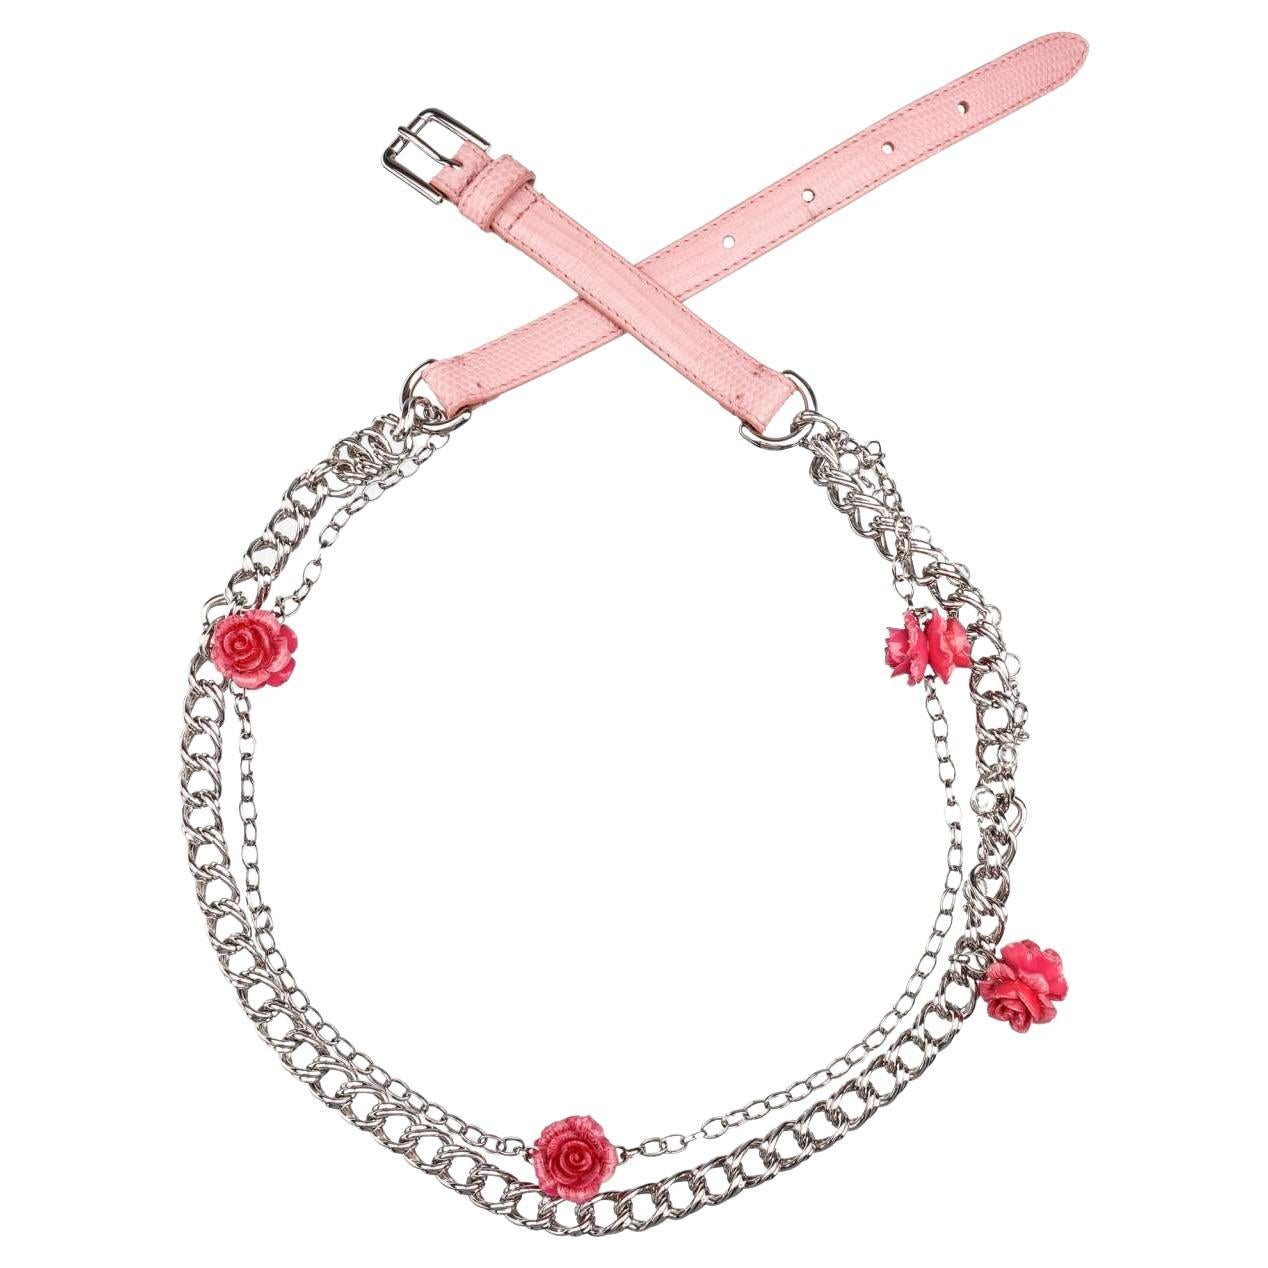 D&G Rose Roses Crystal Lizzard Structure Leather Chain Belt Pink Silver M For Sale